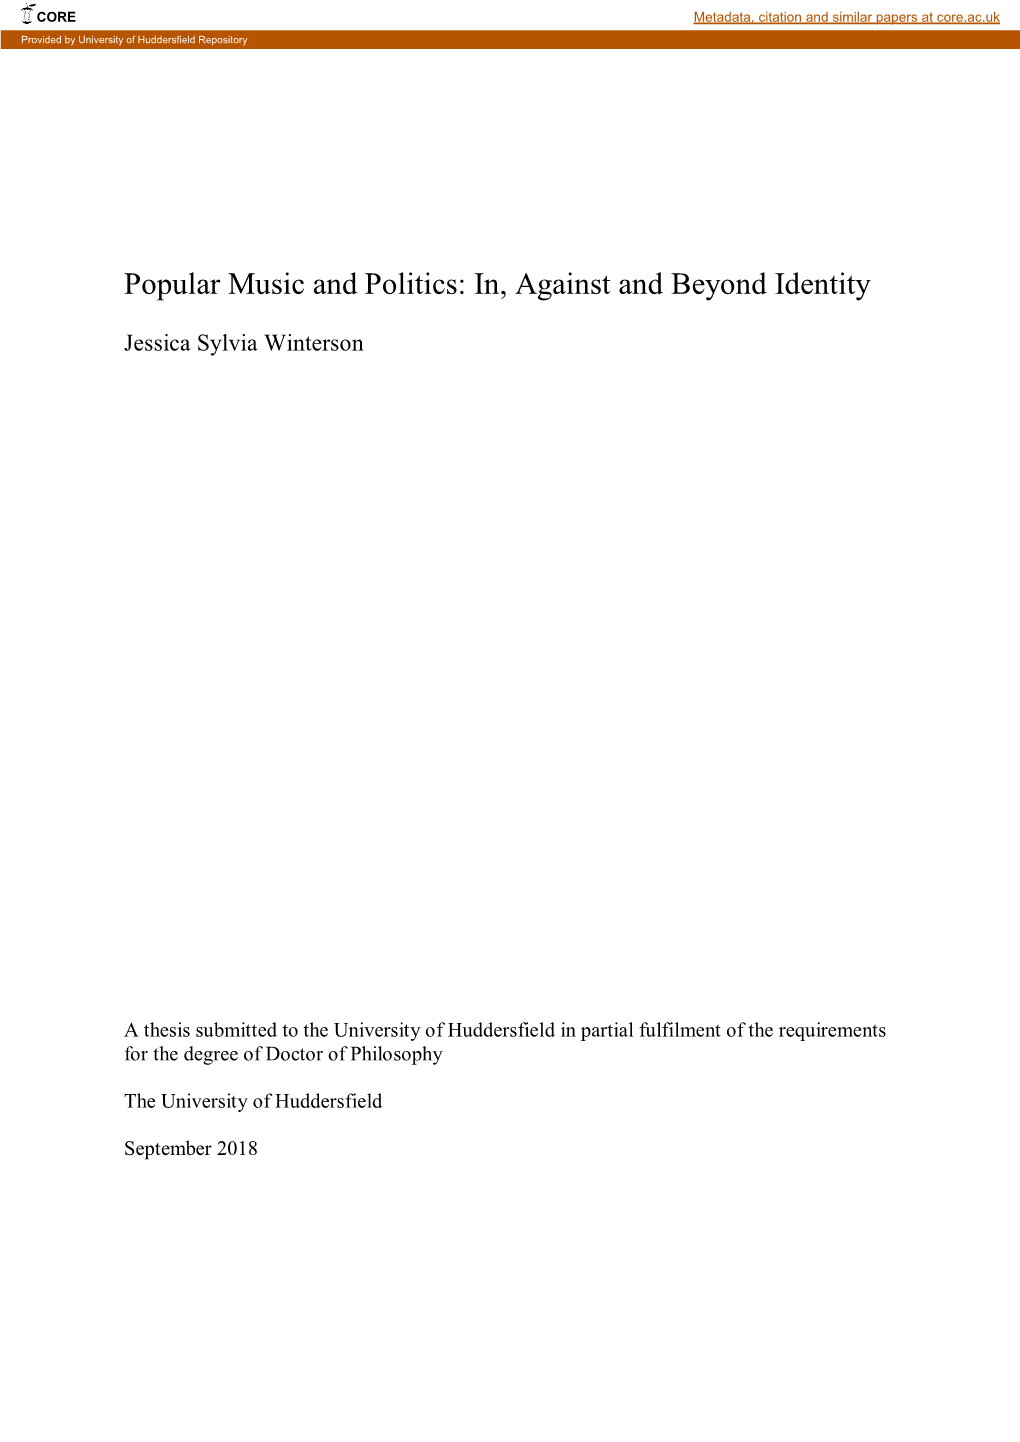 Popular Music and Politics: In, Against and Beyond Identity